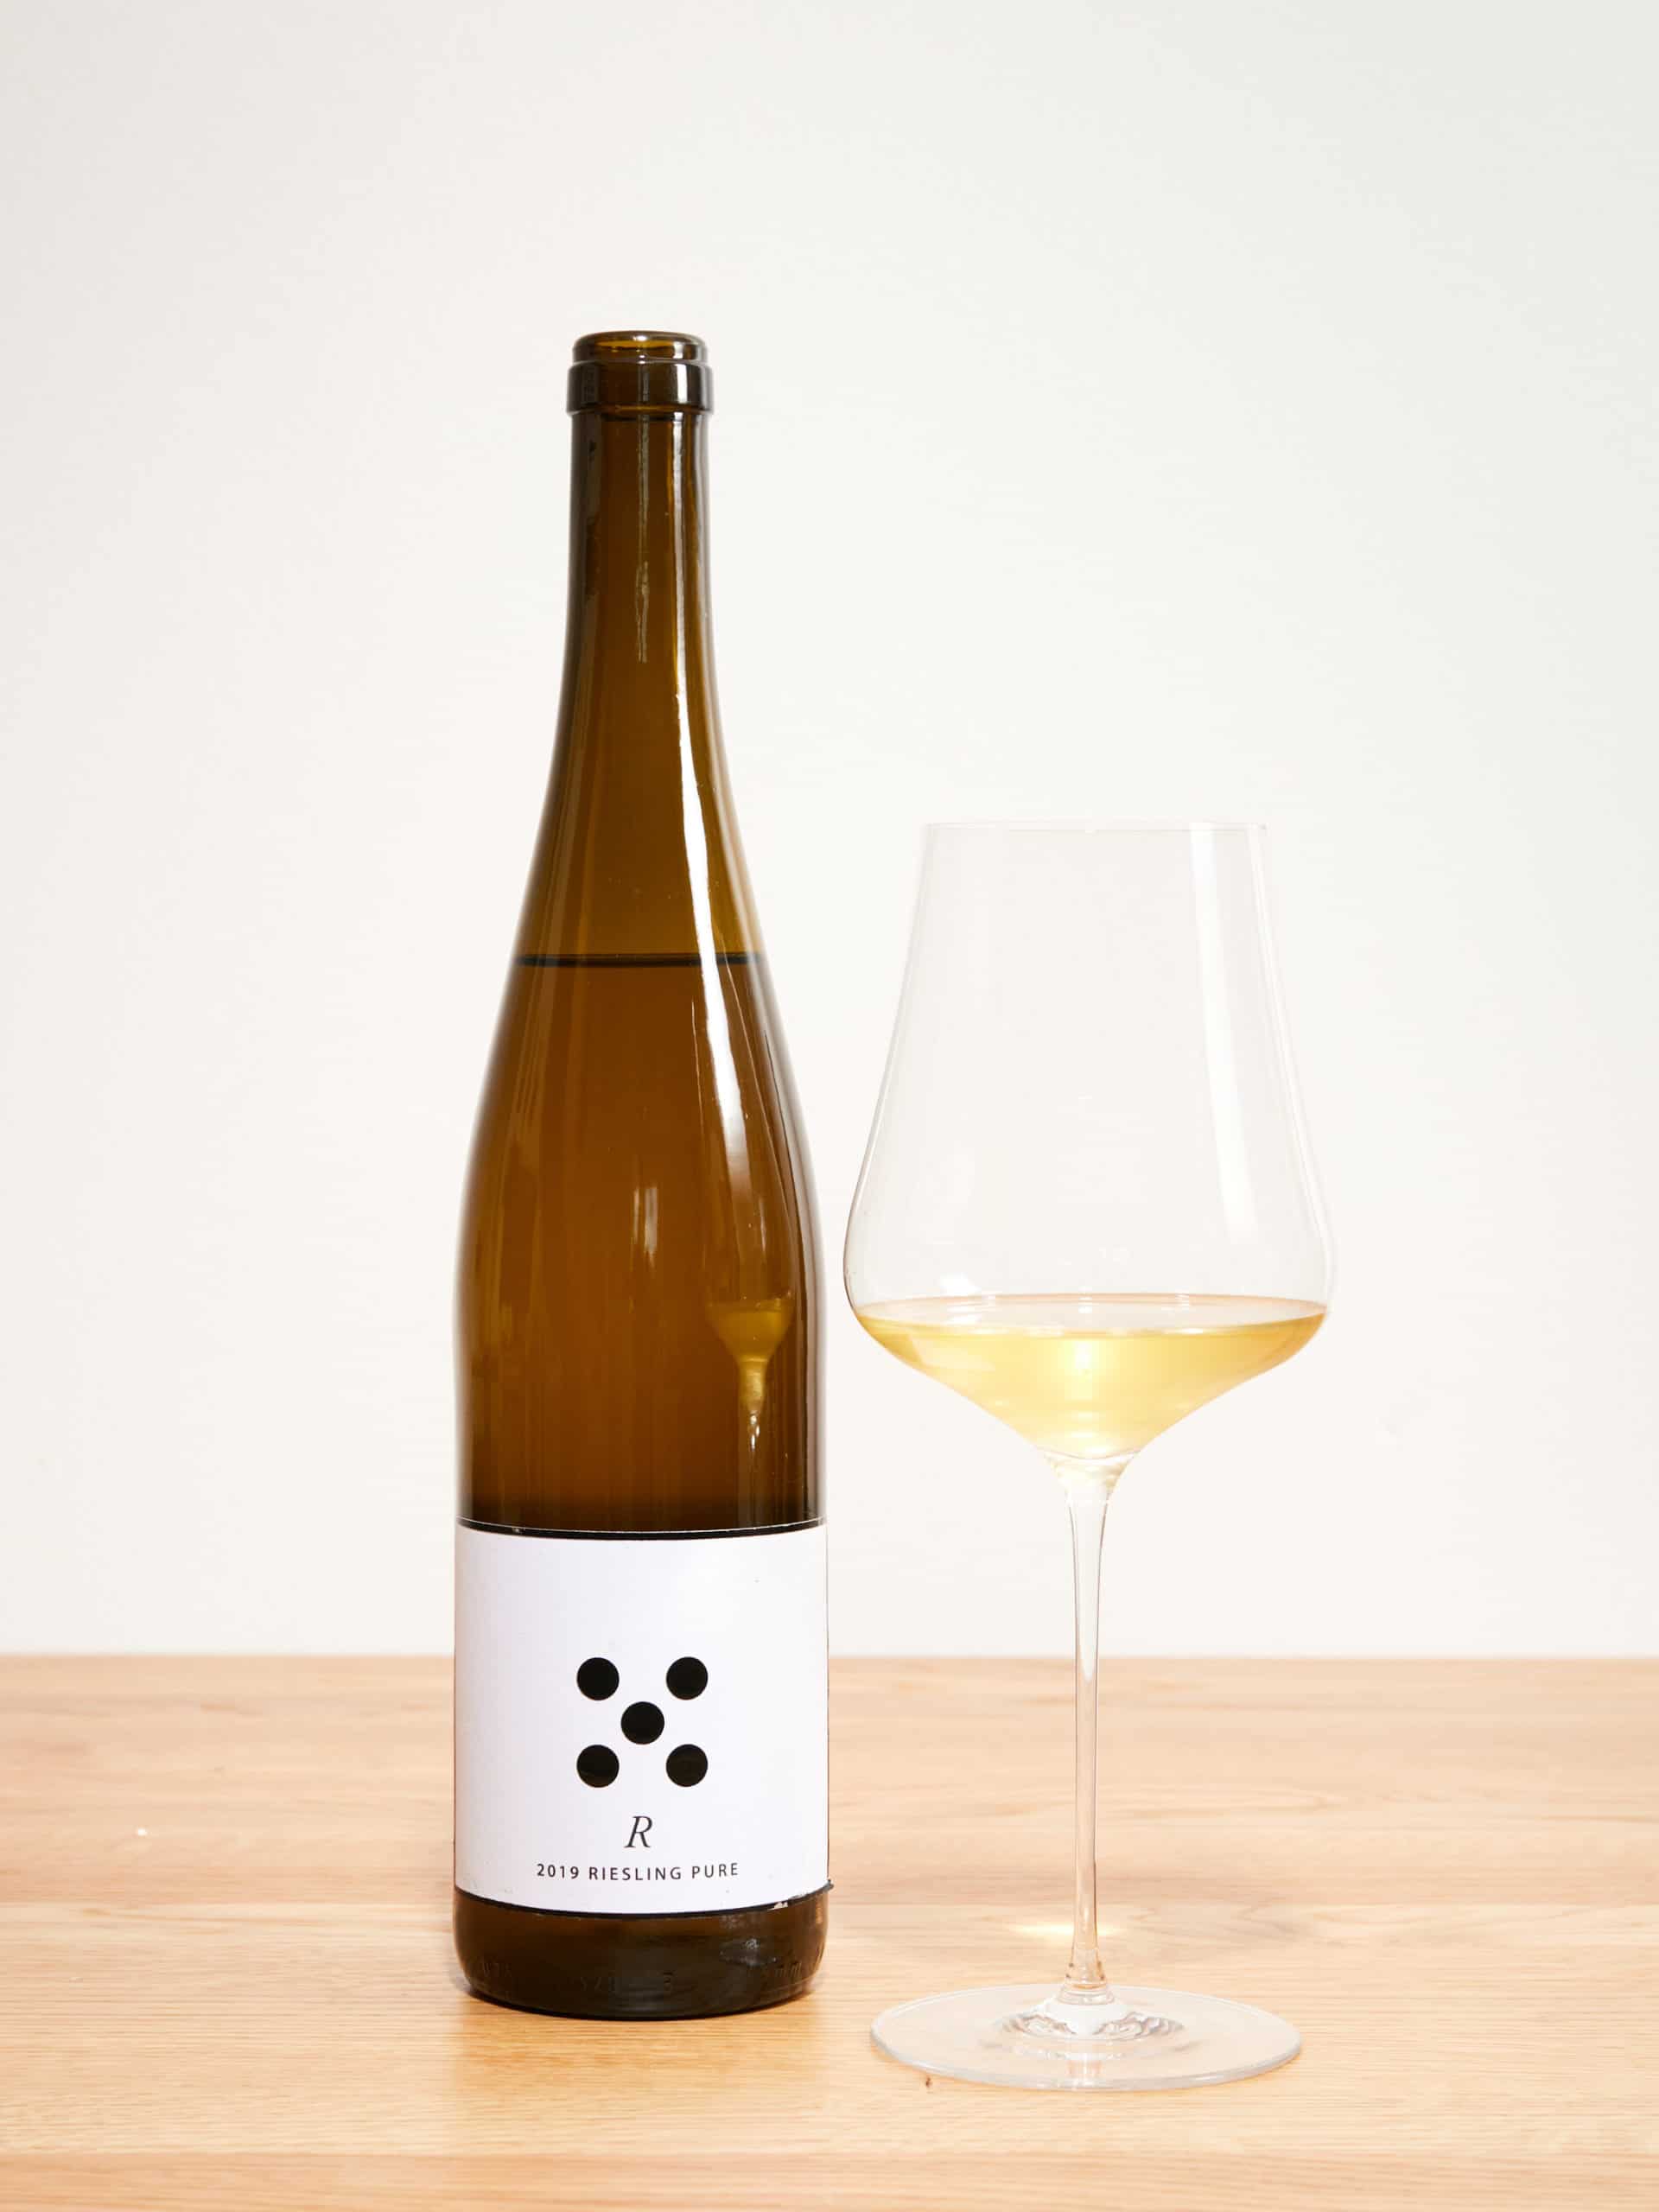 Seckinger – R Riesling Pure 2019